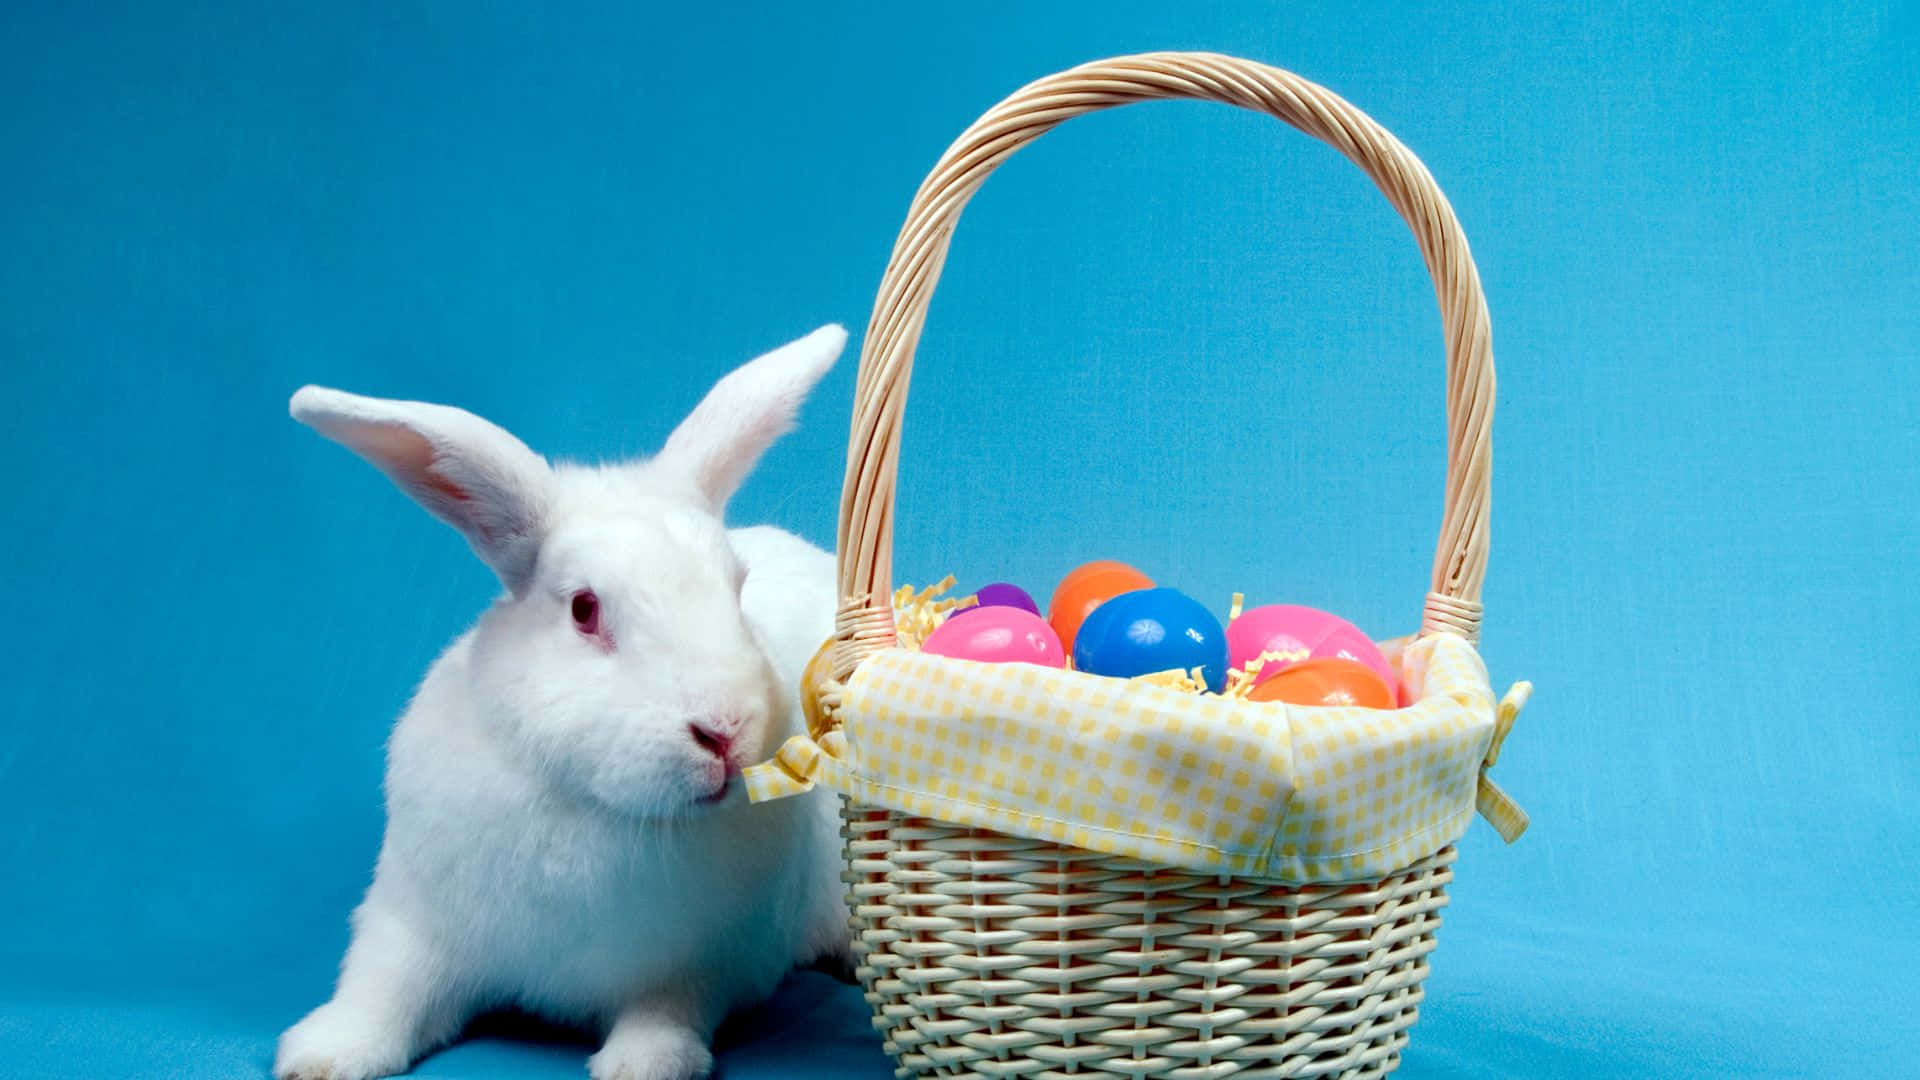 Celebrate Easter with a Colorful Basket Wallpaper